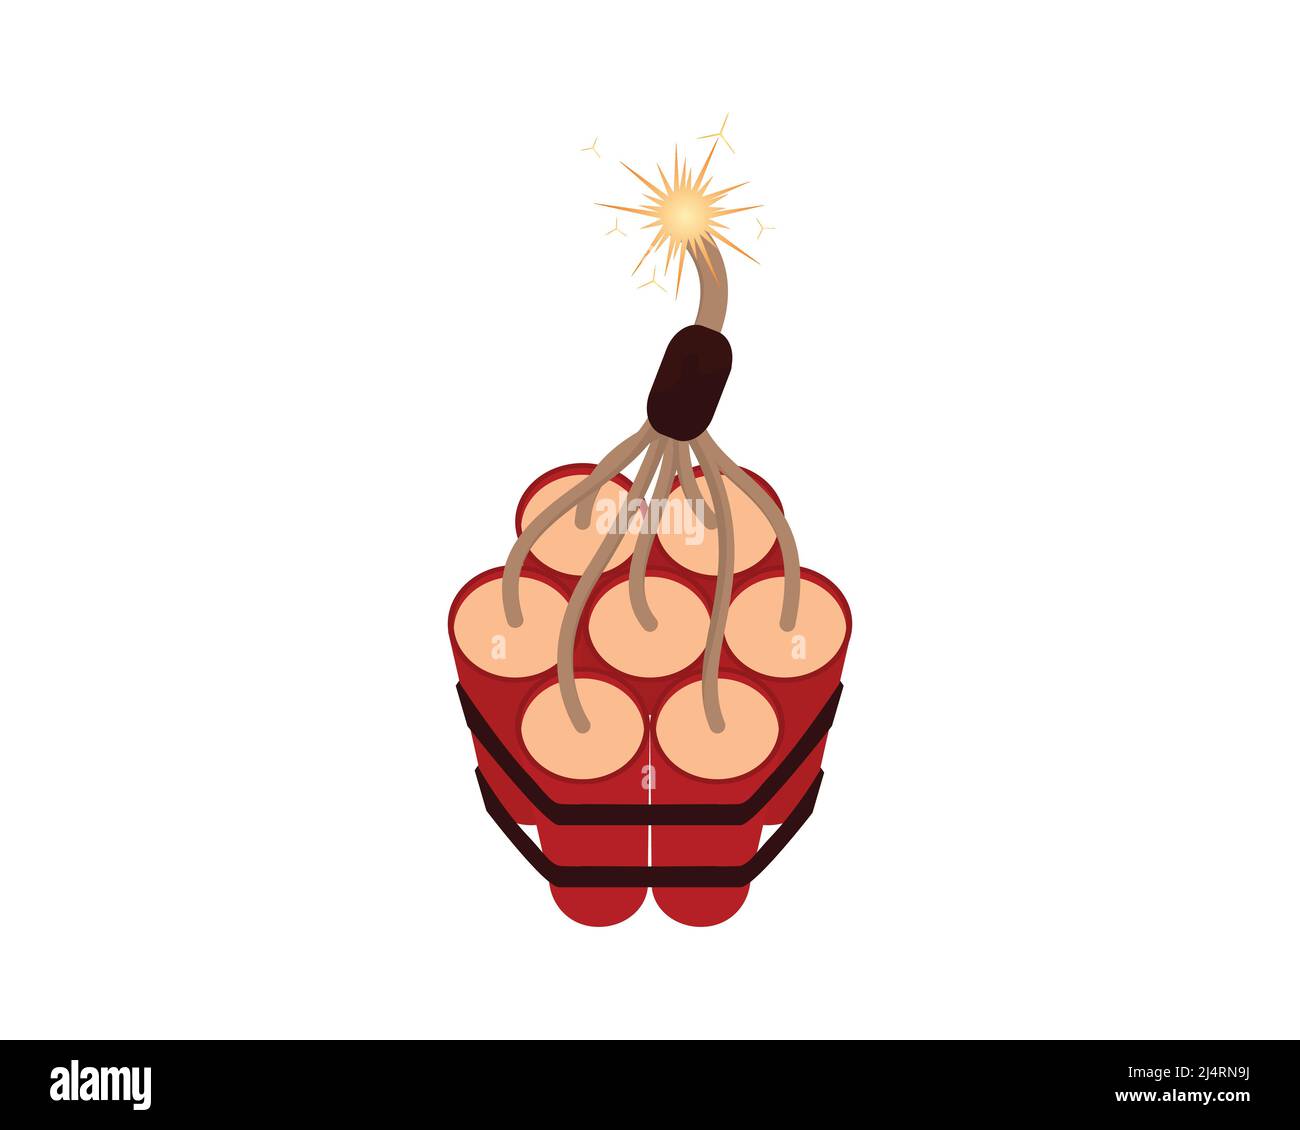 Detailed Dynamite Ready to Explode Illustration Vector Stock Vector